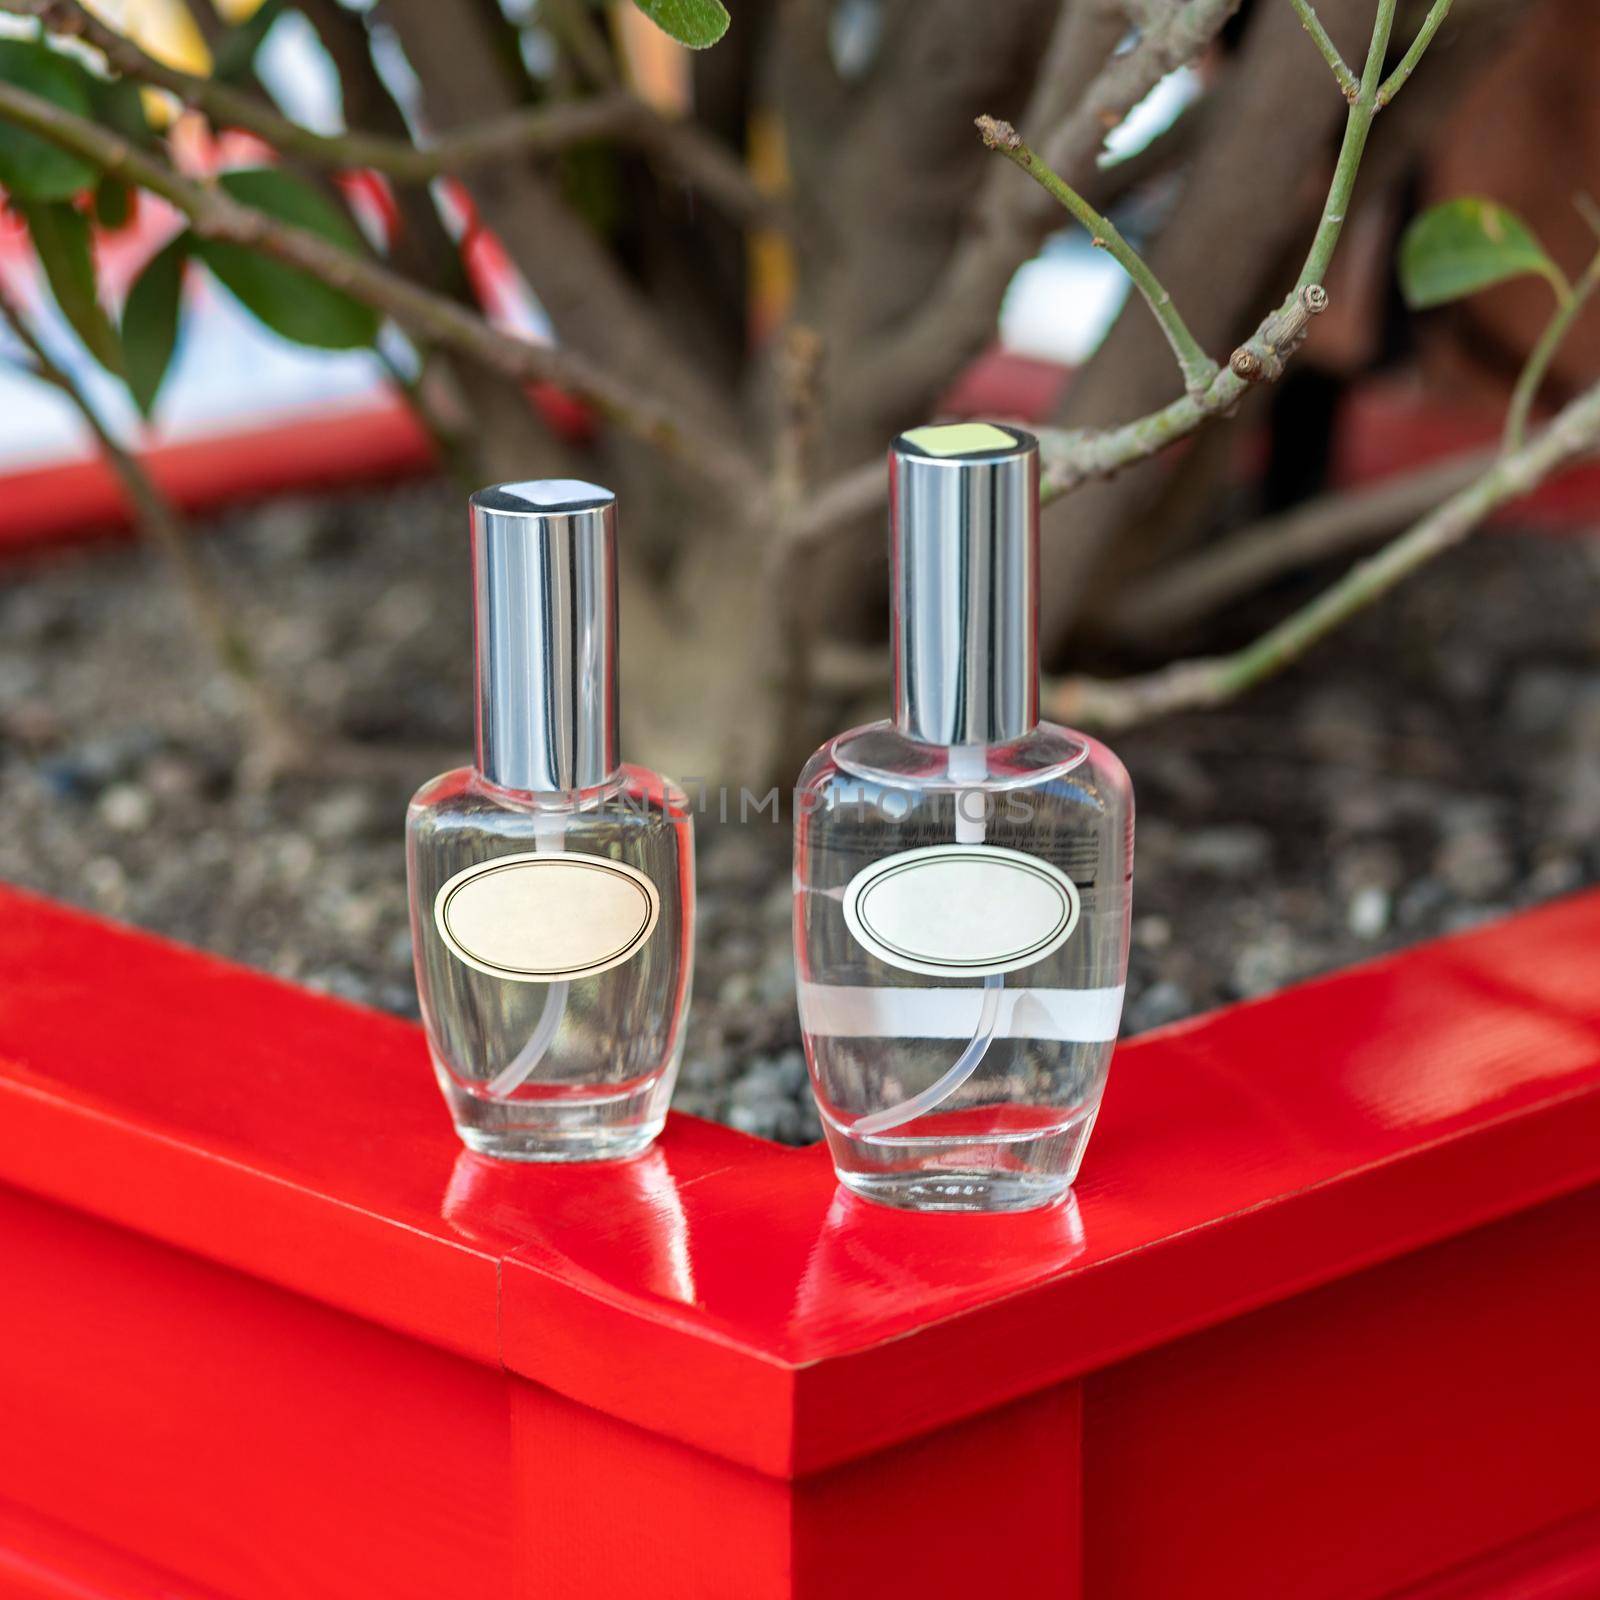 Perfume flacons on the red plant pot by ferhad